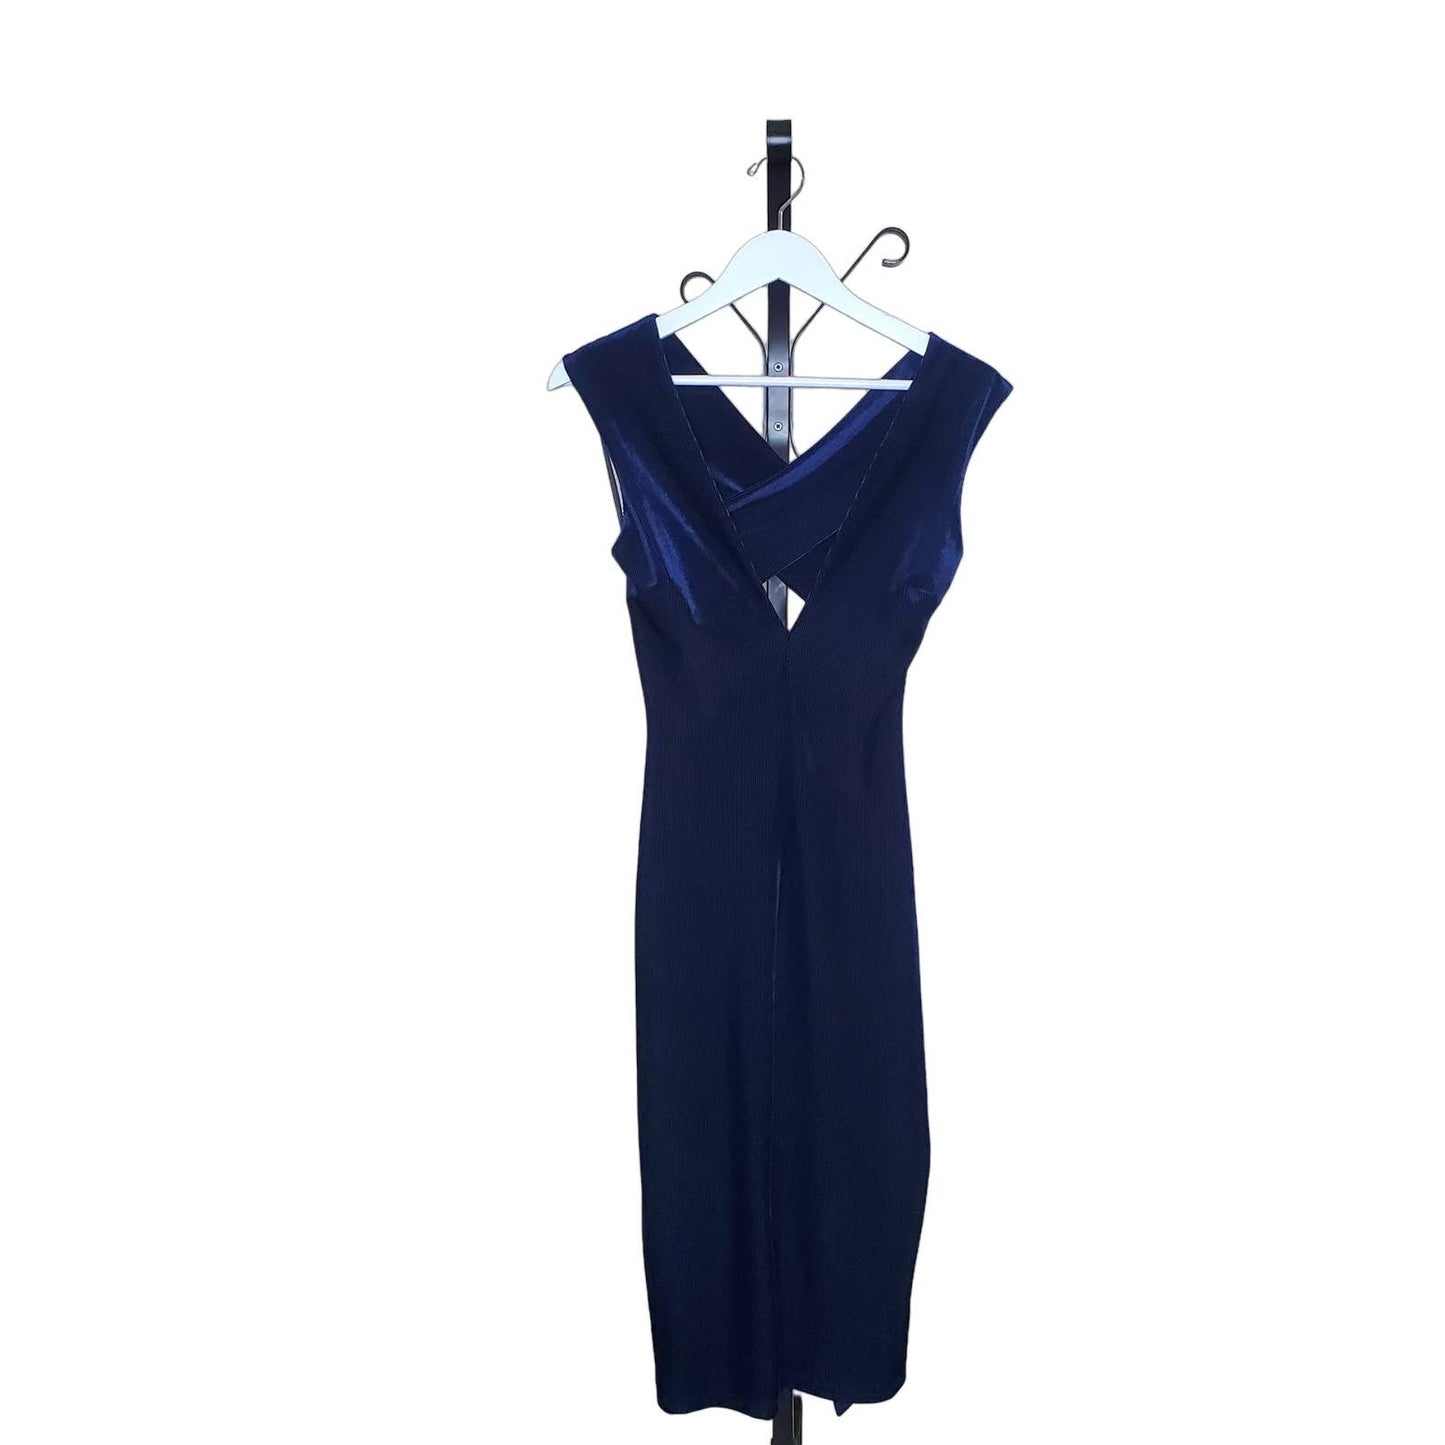 NEW Lovely Day Navy Mid Dress with Open Back, Size Small